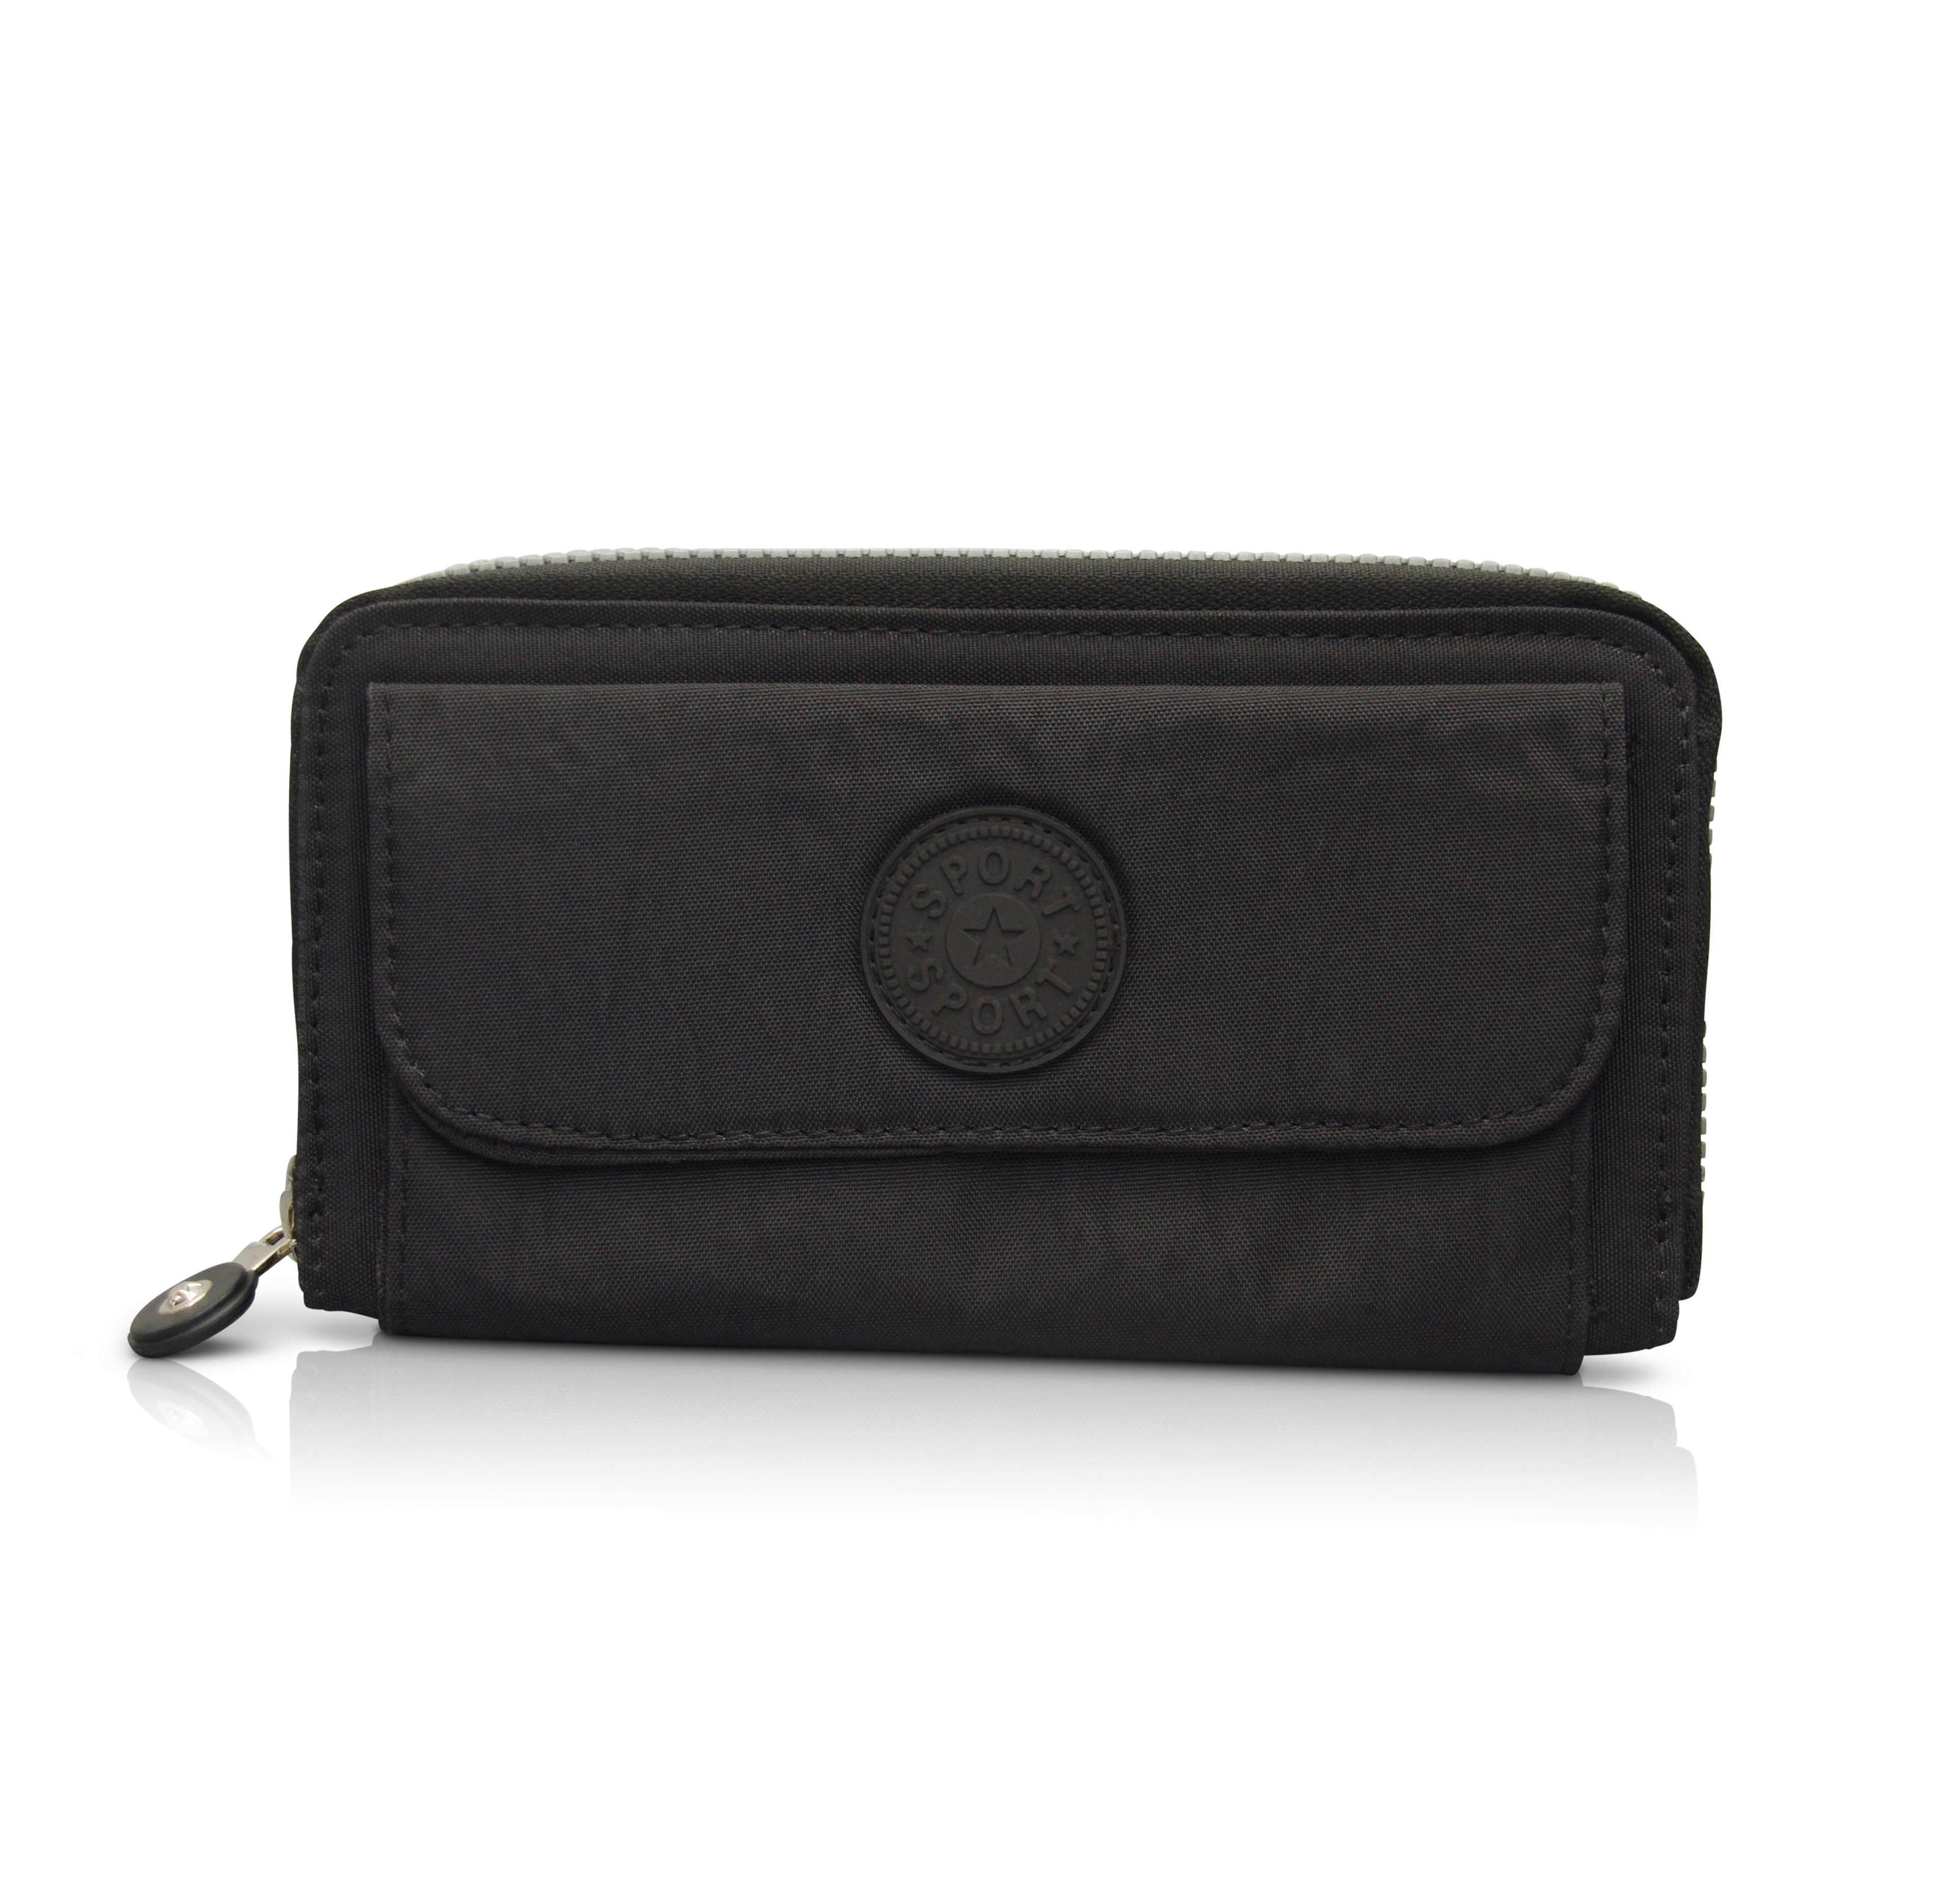 Cienna - KP19008 Large Zip Wallet with Phone Pouch - Black-1